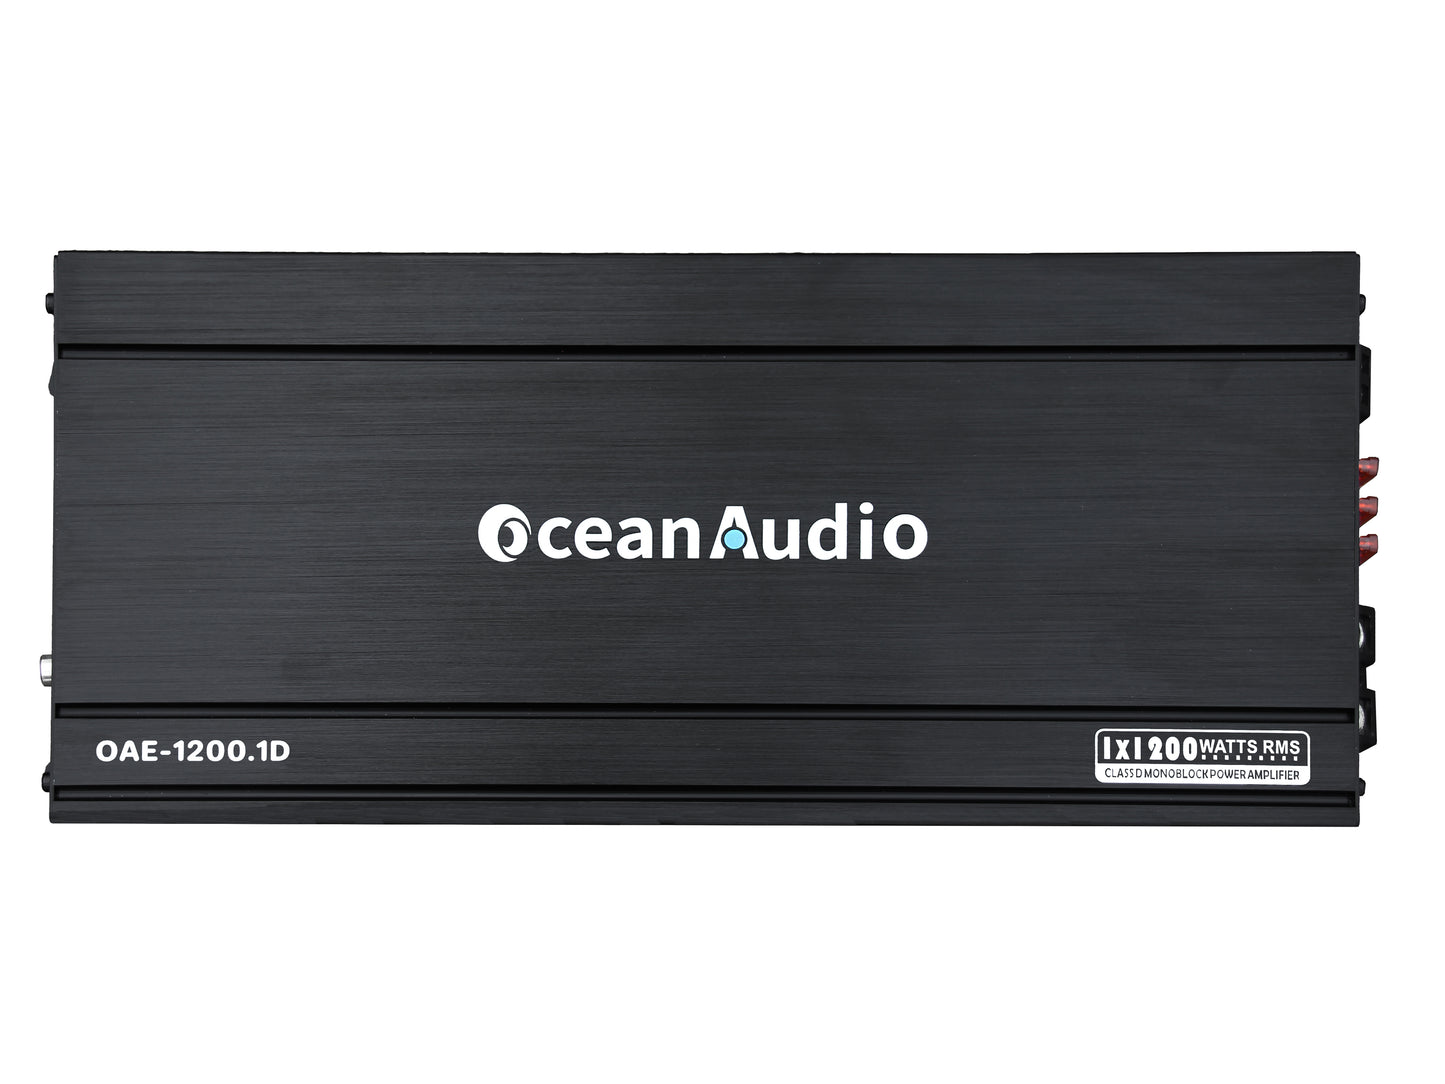 OceanAudio OAE-1200.1D Monoblock Class D Amplifier with Remote Subwoofer Level Control, 2400W - RMS Power @4Ω 1*480W @2Ω 1*800W @1Ω 1*1200W Max Power @1Ω 1*2400W